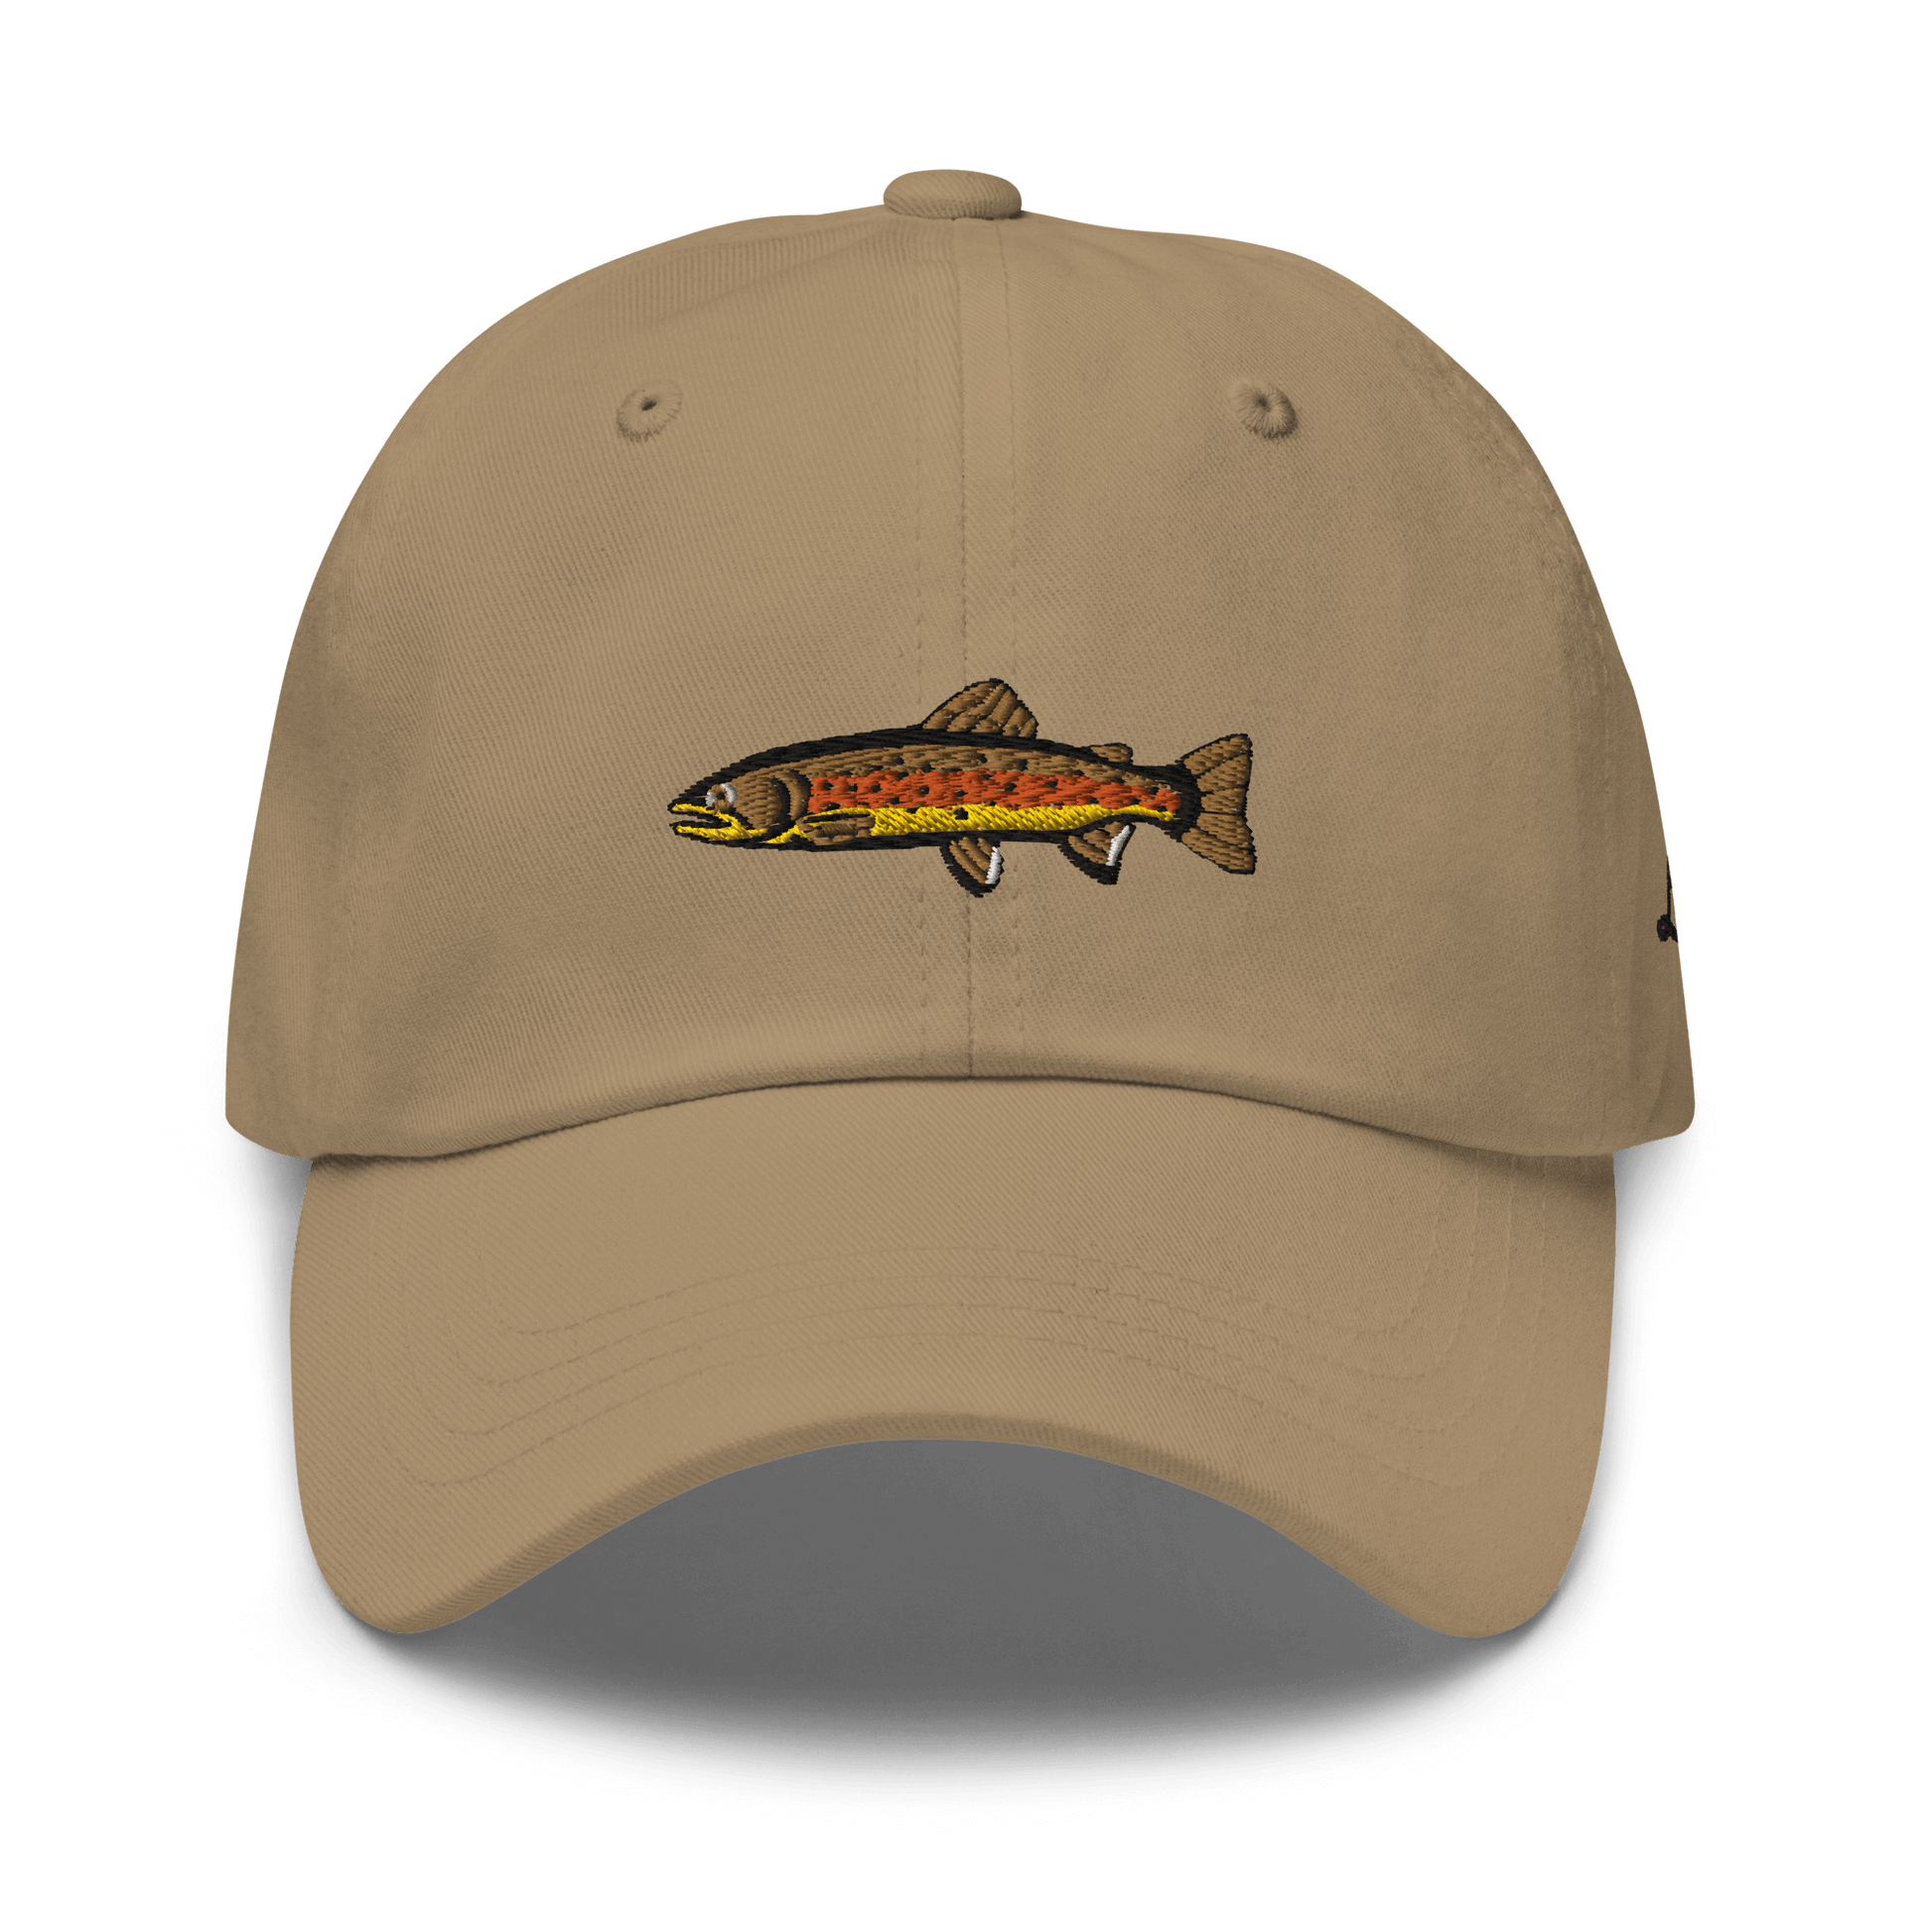 Brown Trout fishing hat. It’s a simple embroidered hat/ dad hat with a brown trout and the lost lure logo on the side. Light brown hat, front side